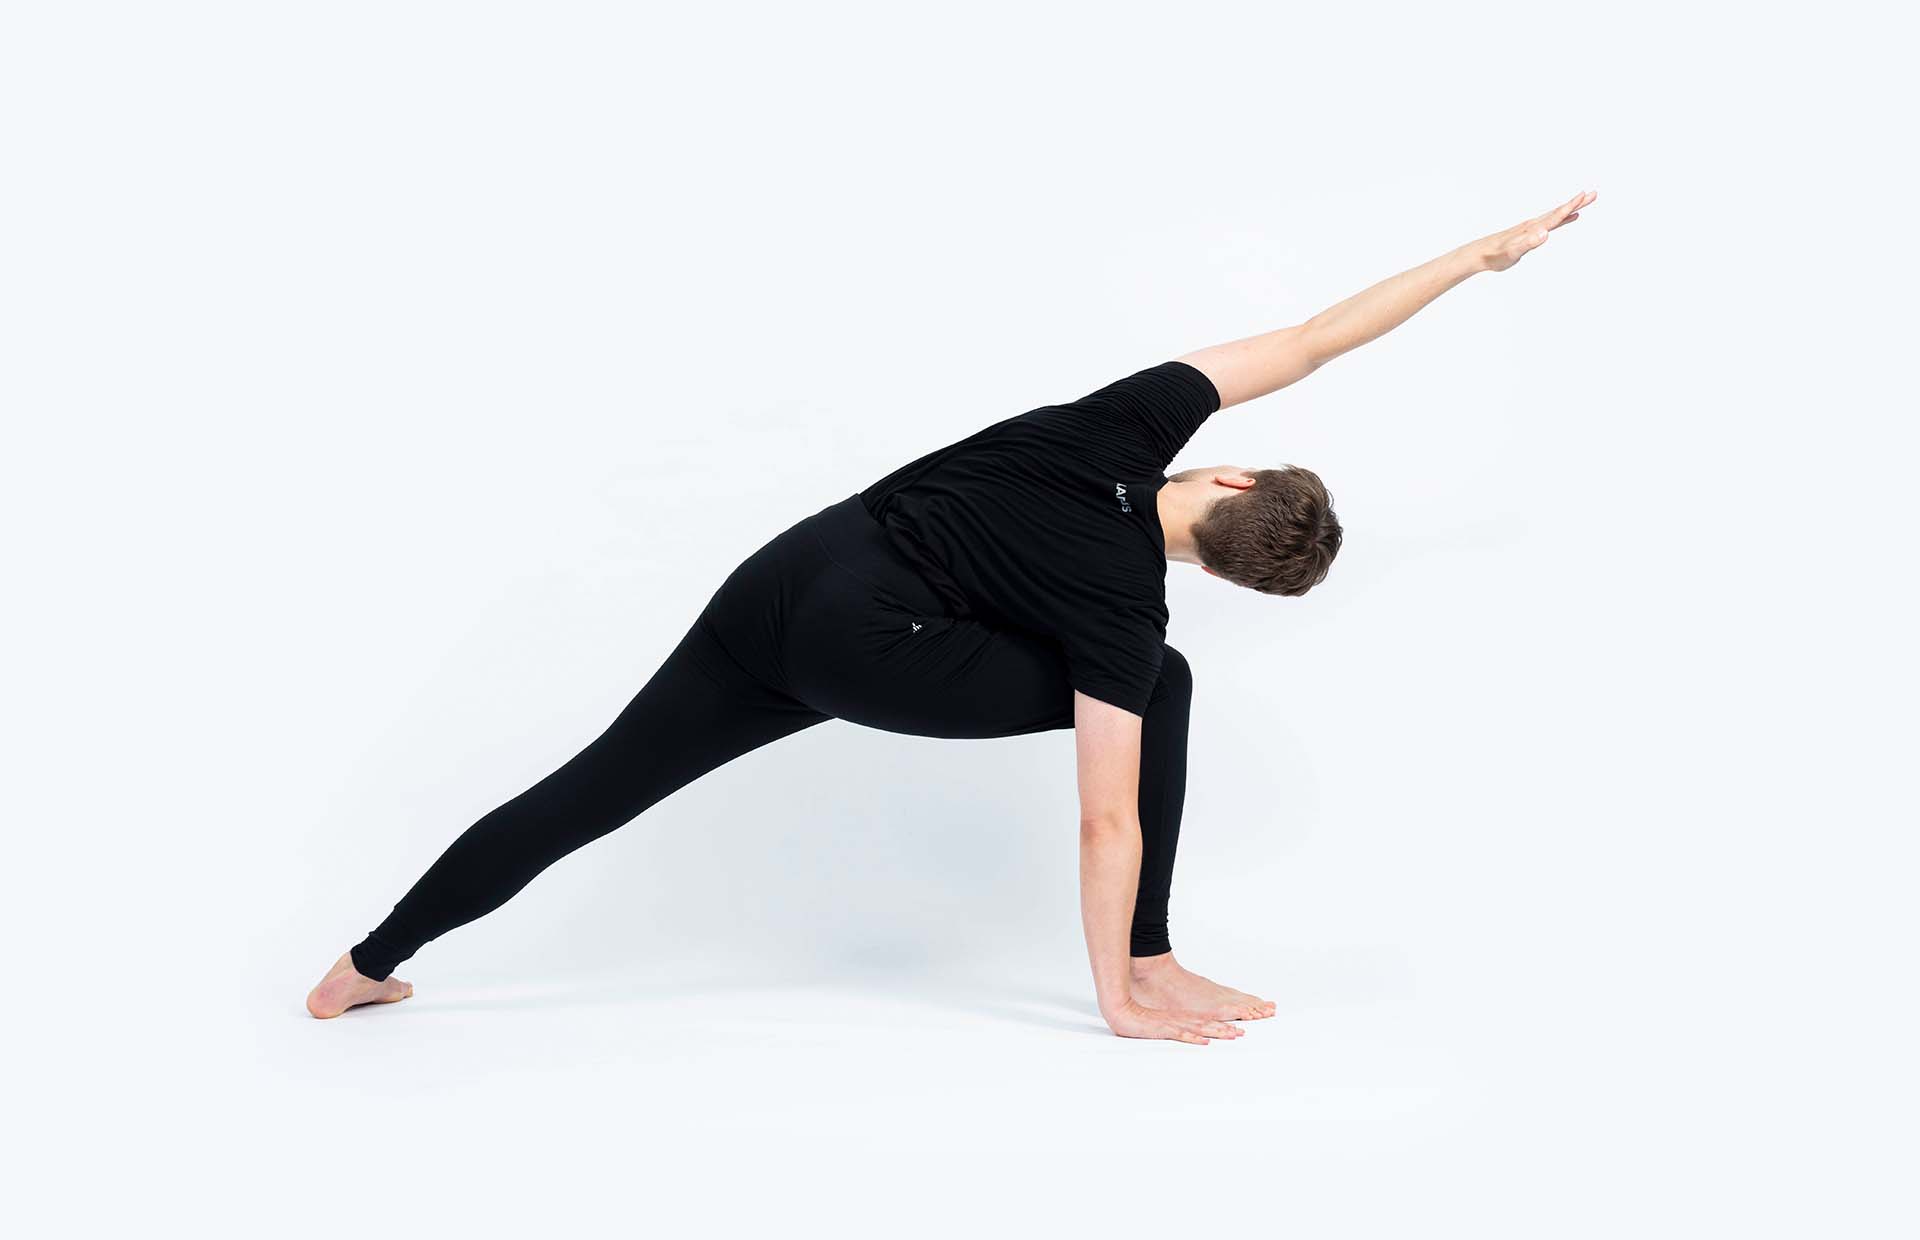 A person bending in Utthita Parsvakonasana A (Extended Side Angle A)